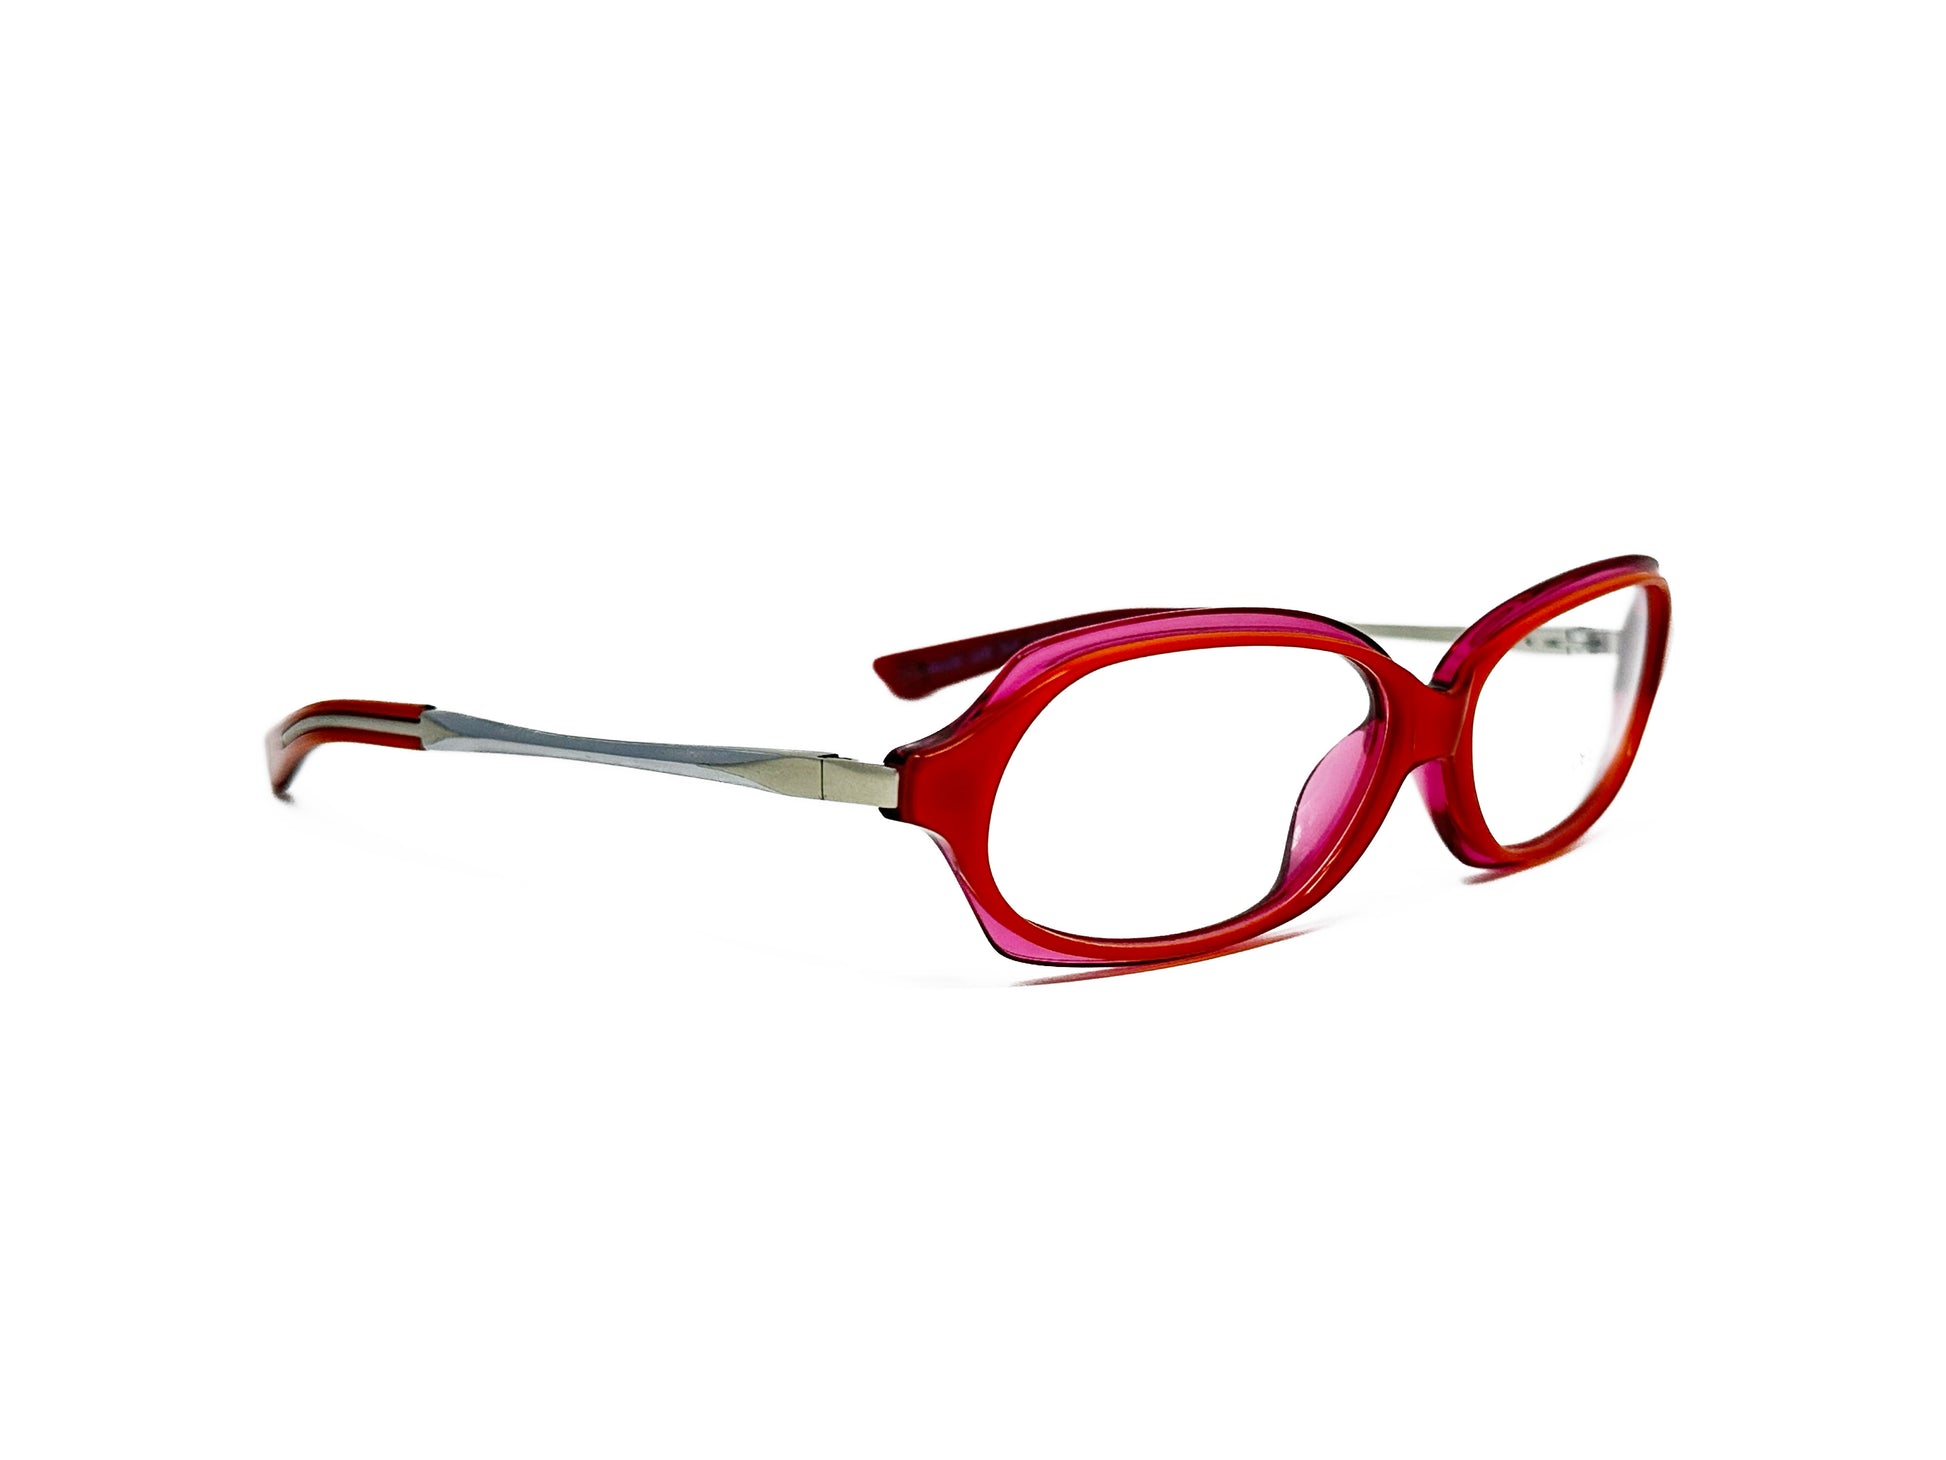 Gee Vice uplifted, curved, rectangular, optical frame with acetate front and metal temples. Model: Premiere. Color: Semi-transparent red. Side view.